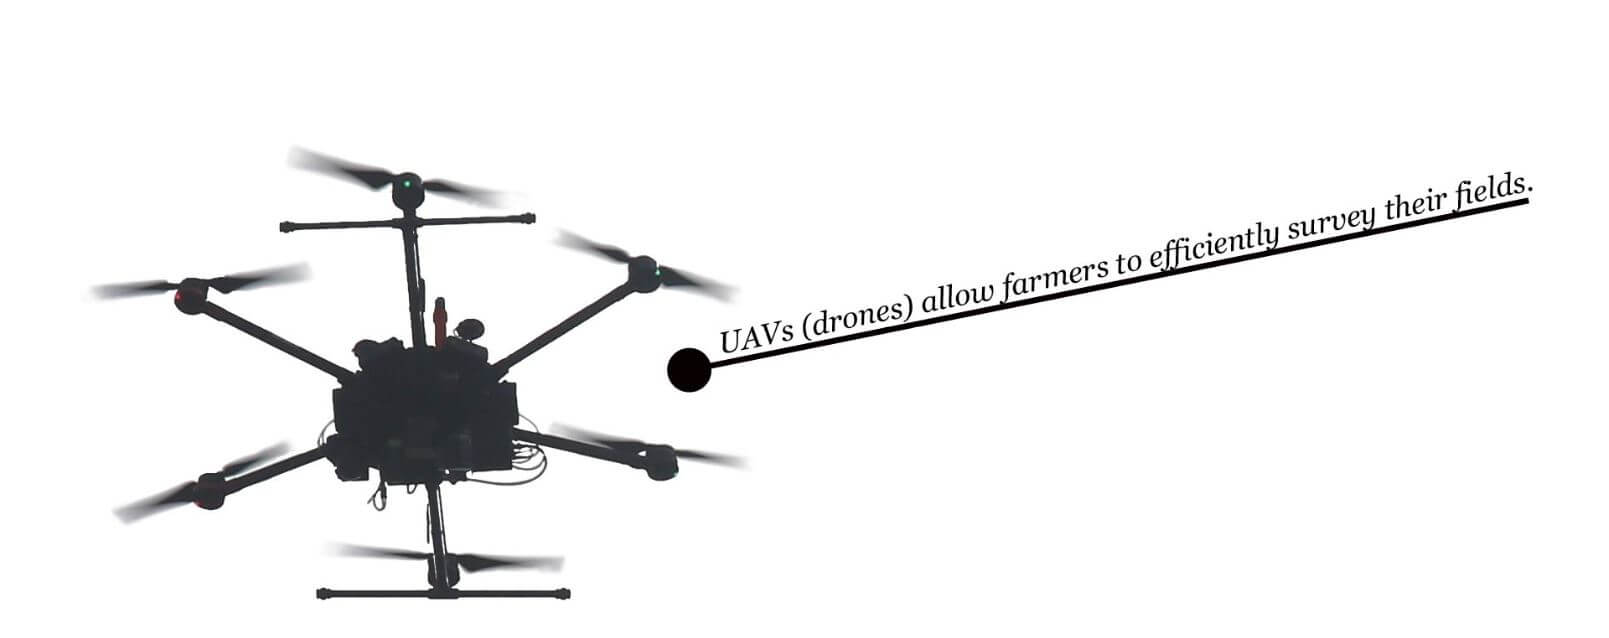 A UAV drone used in digital agriculture